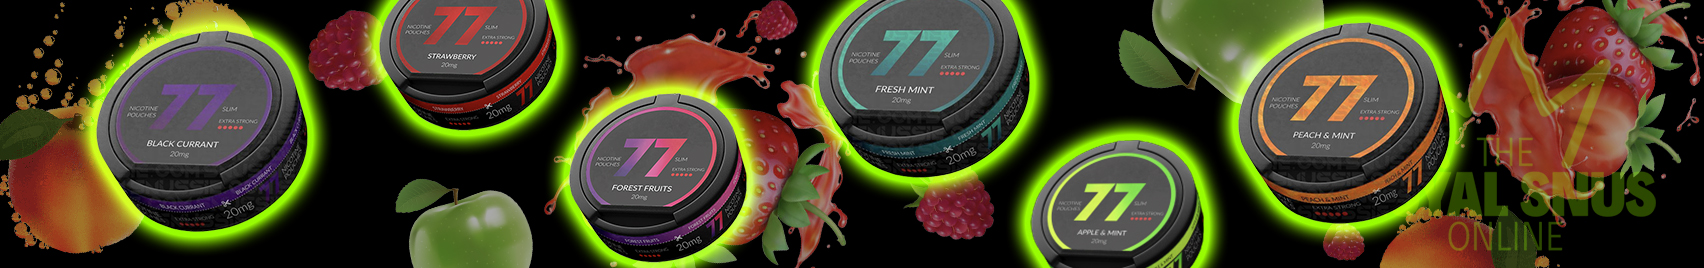 Buy 77 nicotine pouches at The Royal Snus Online